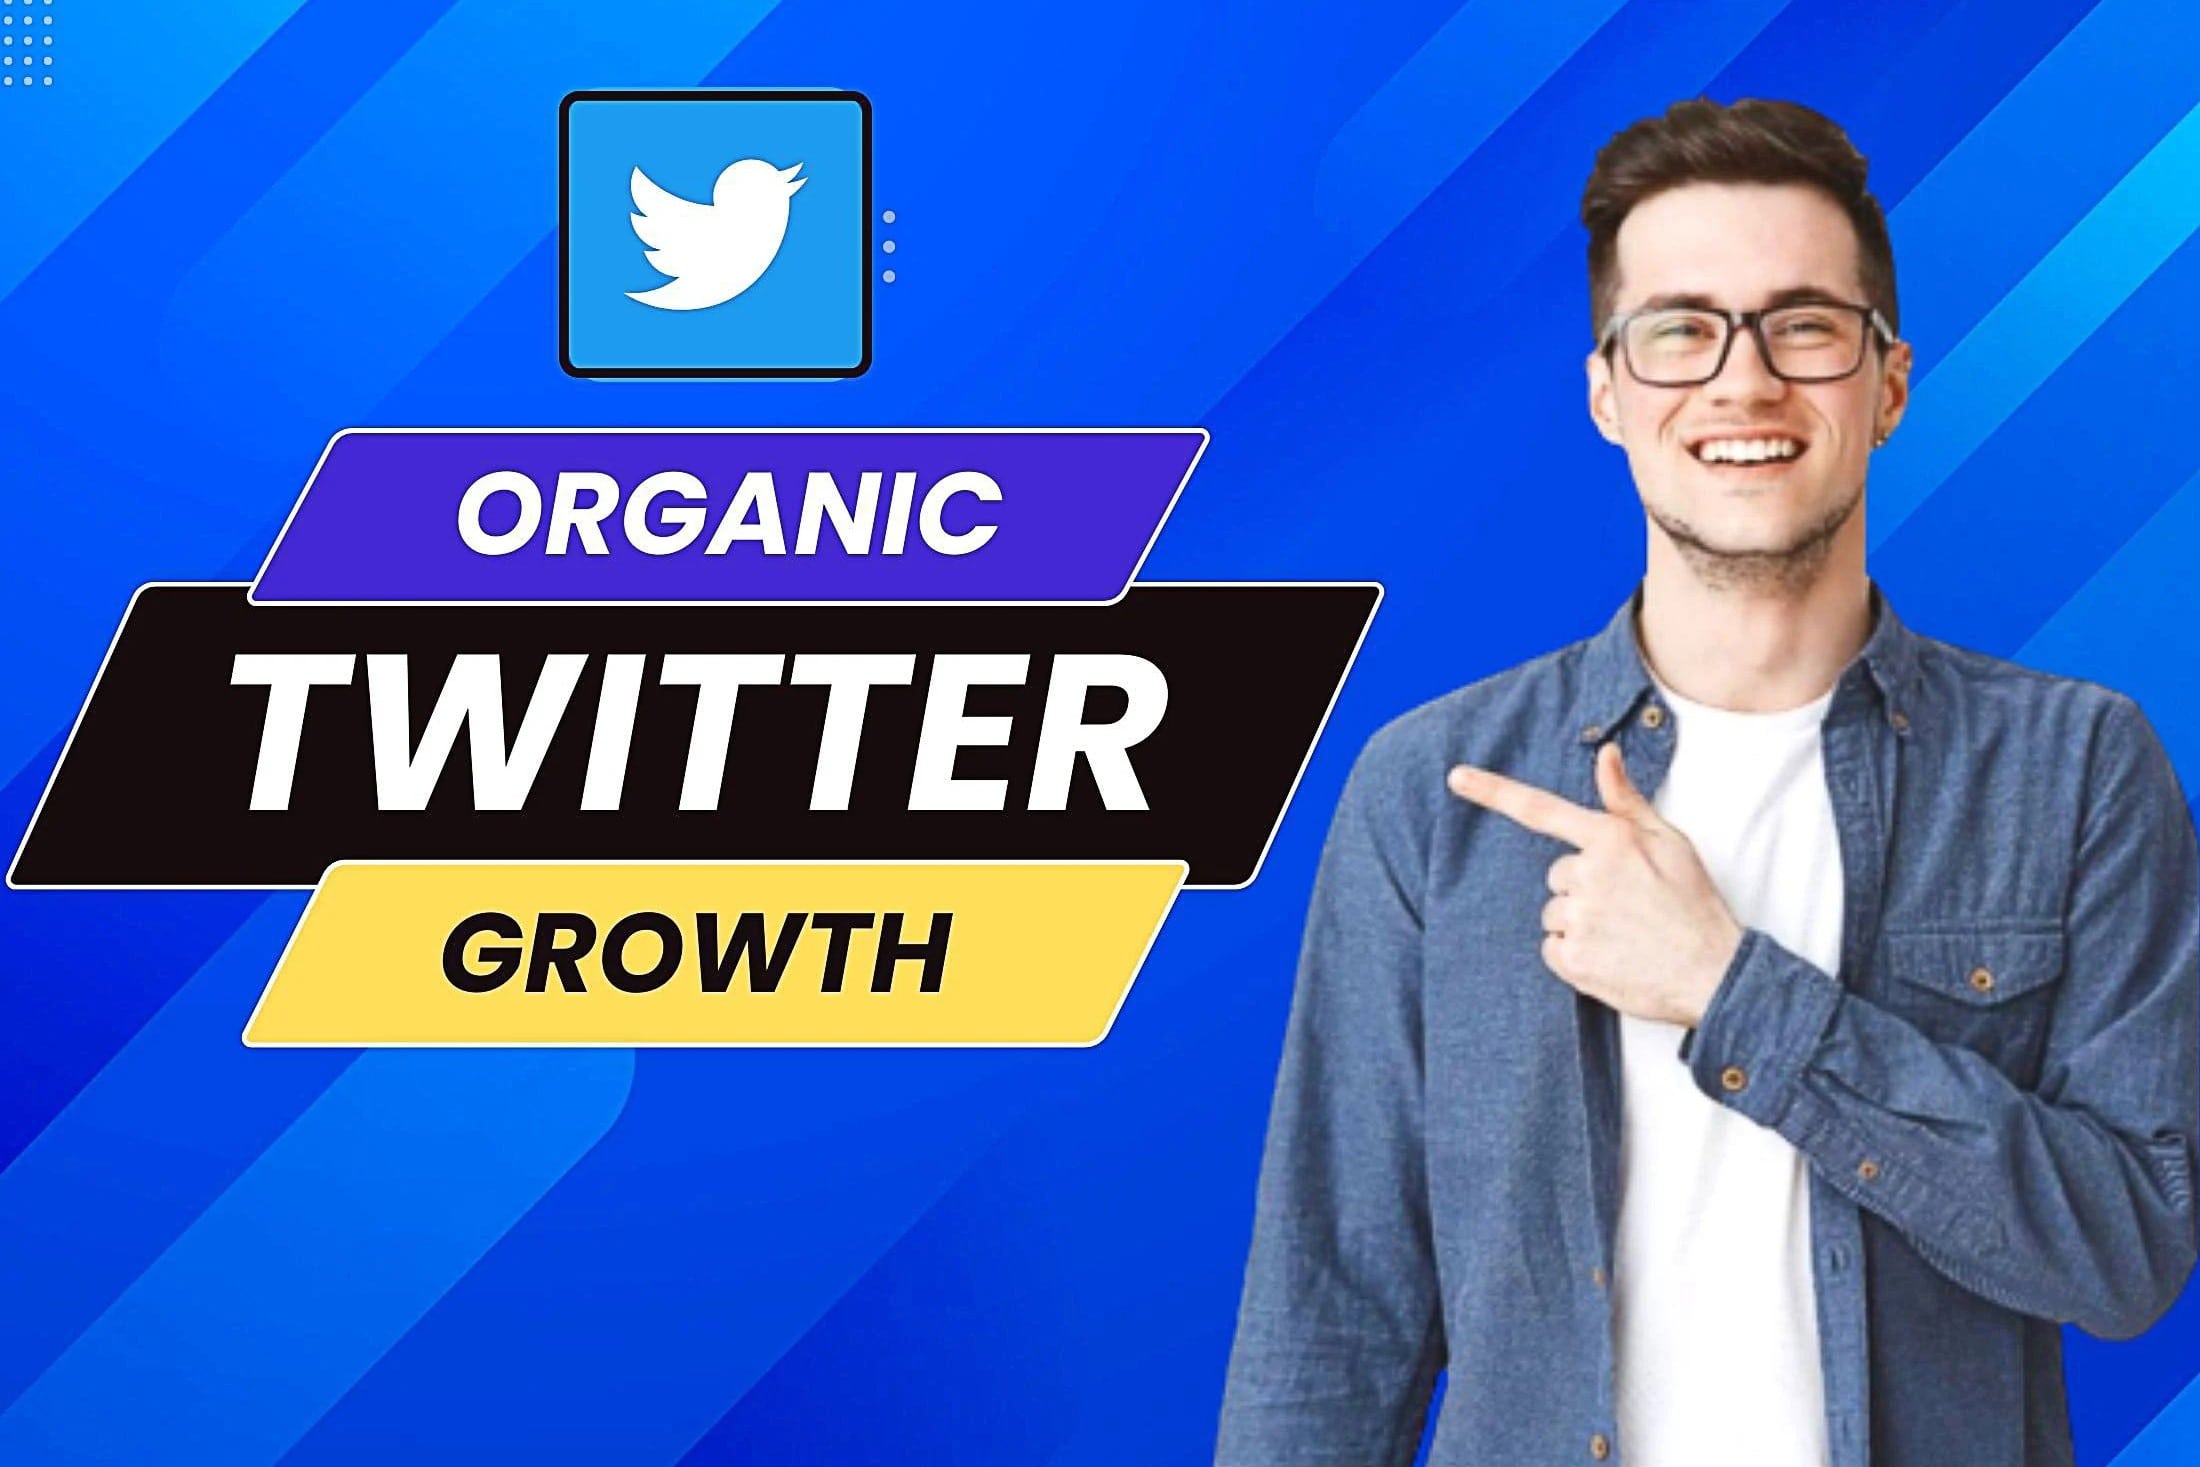 I will grow fast organic x Twitter growth, marketing, and promotion